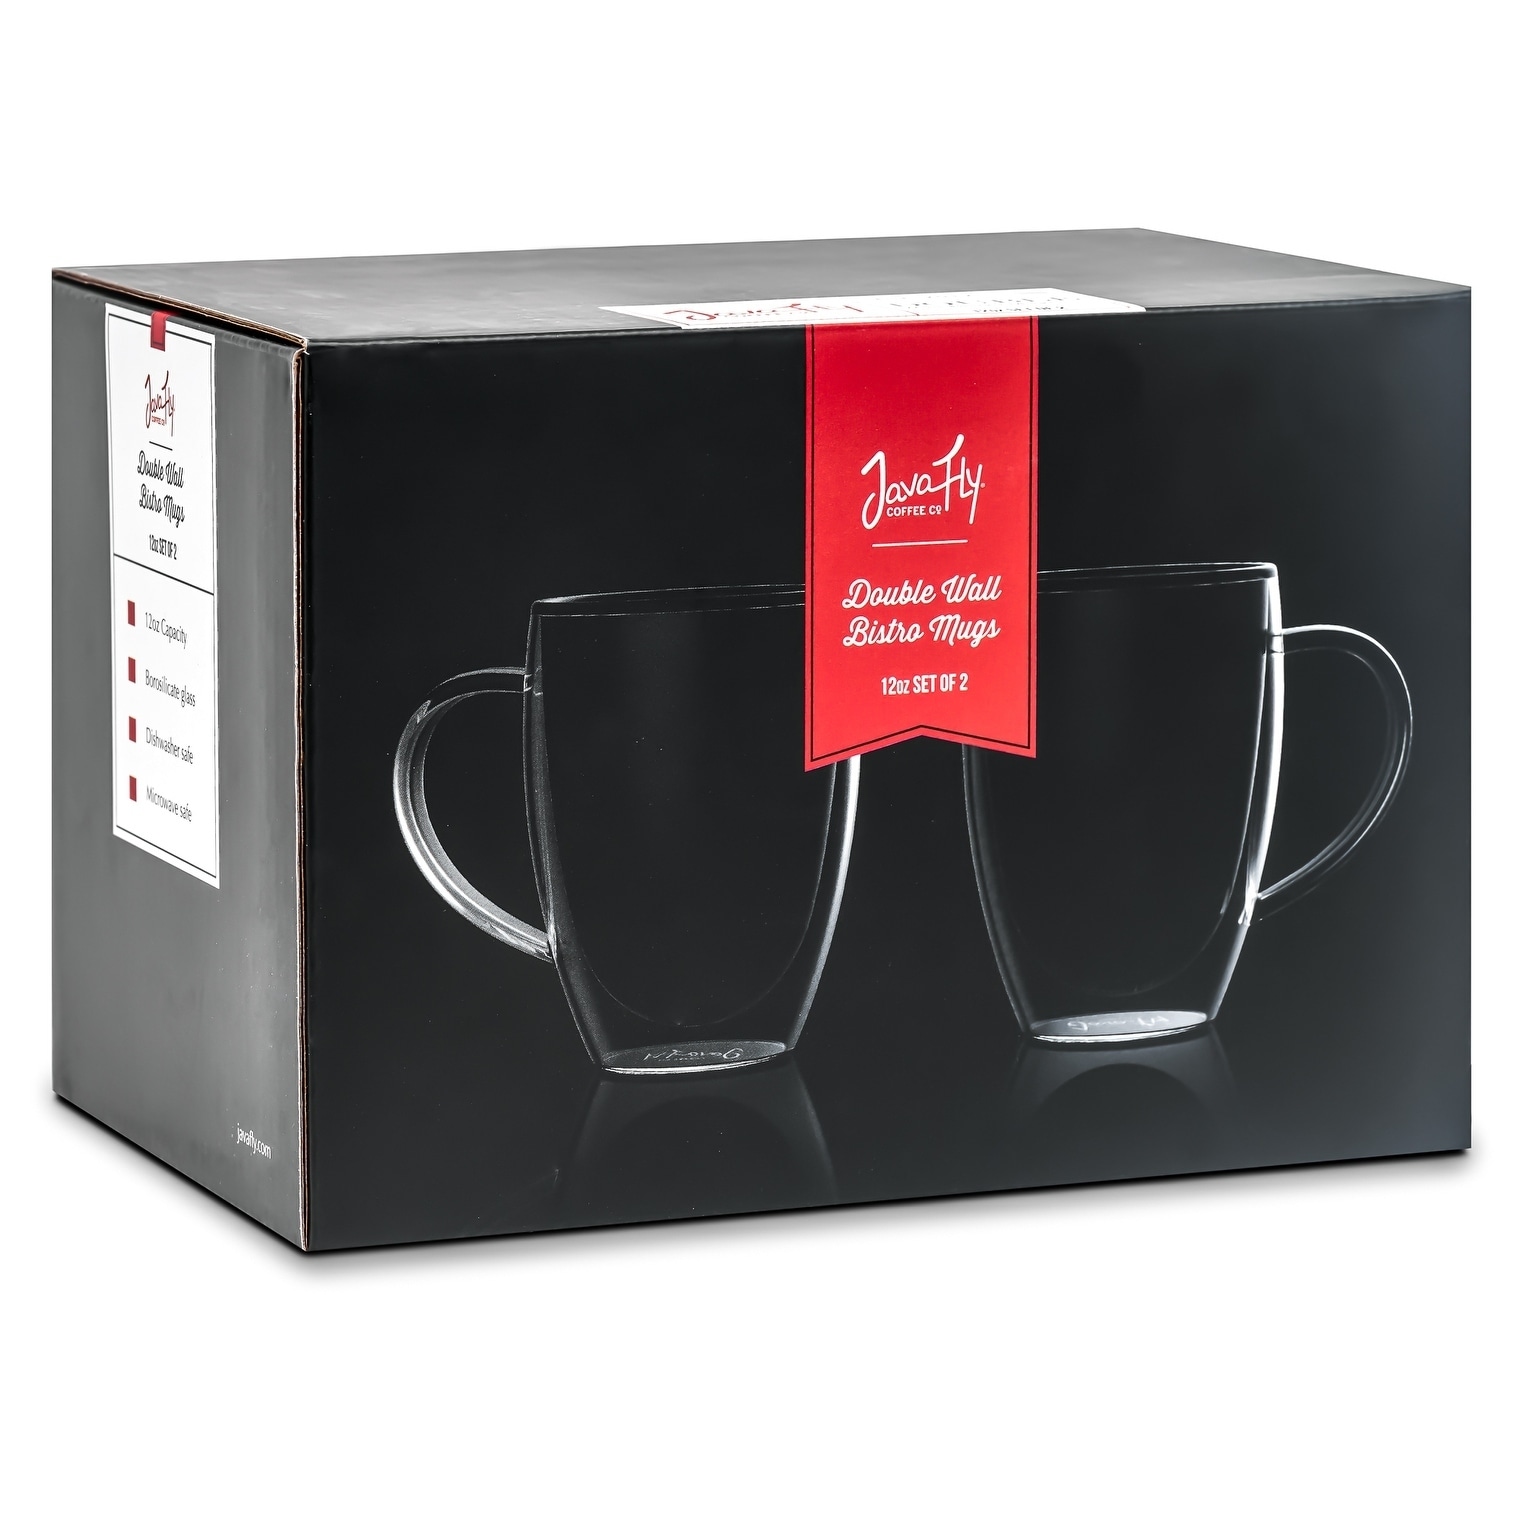 https://ak1.ostkcdn.com/images/products/14427905/JavaFly-Clear-Glass-12-ounce-Double-walled-Thermo-Bistro-Mug-with-Handle-Set-of-2-9e7cf9d3-635a-40d4-aade-ab561dd8e7aa.jpg